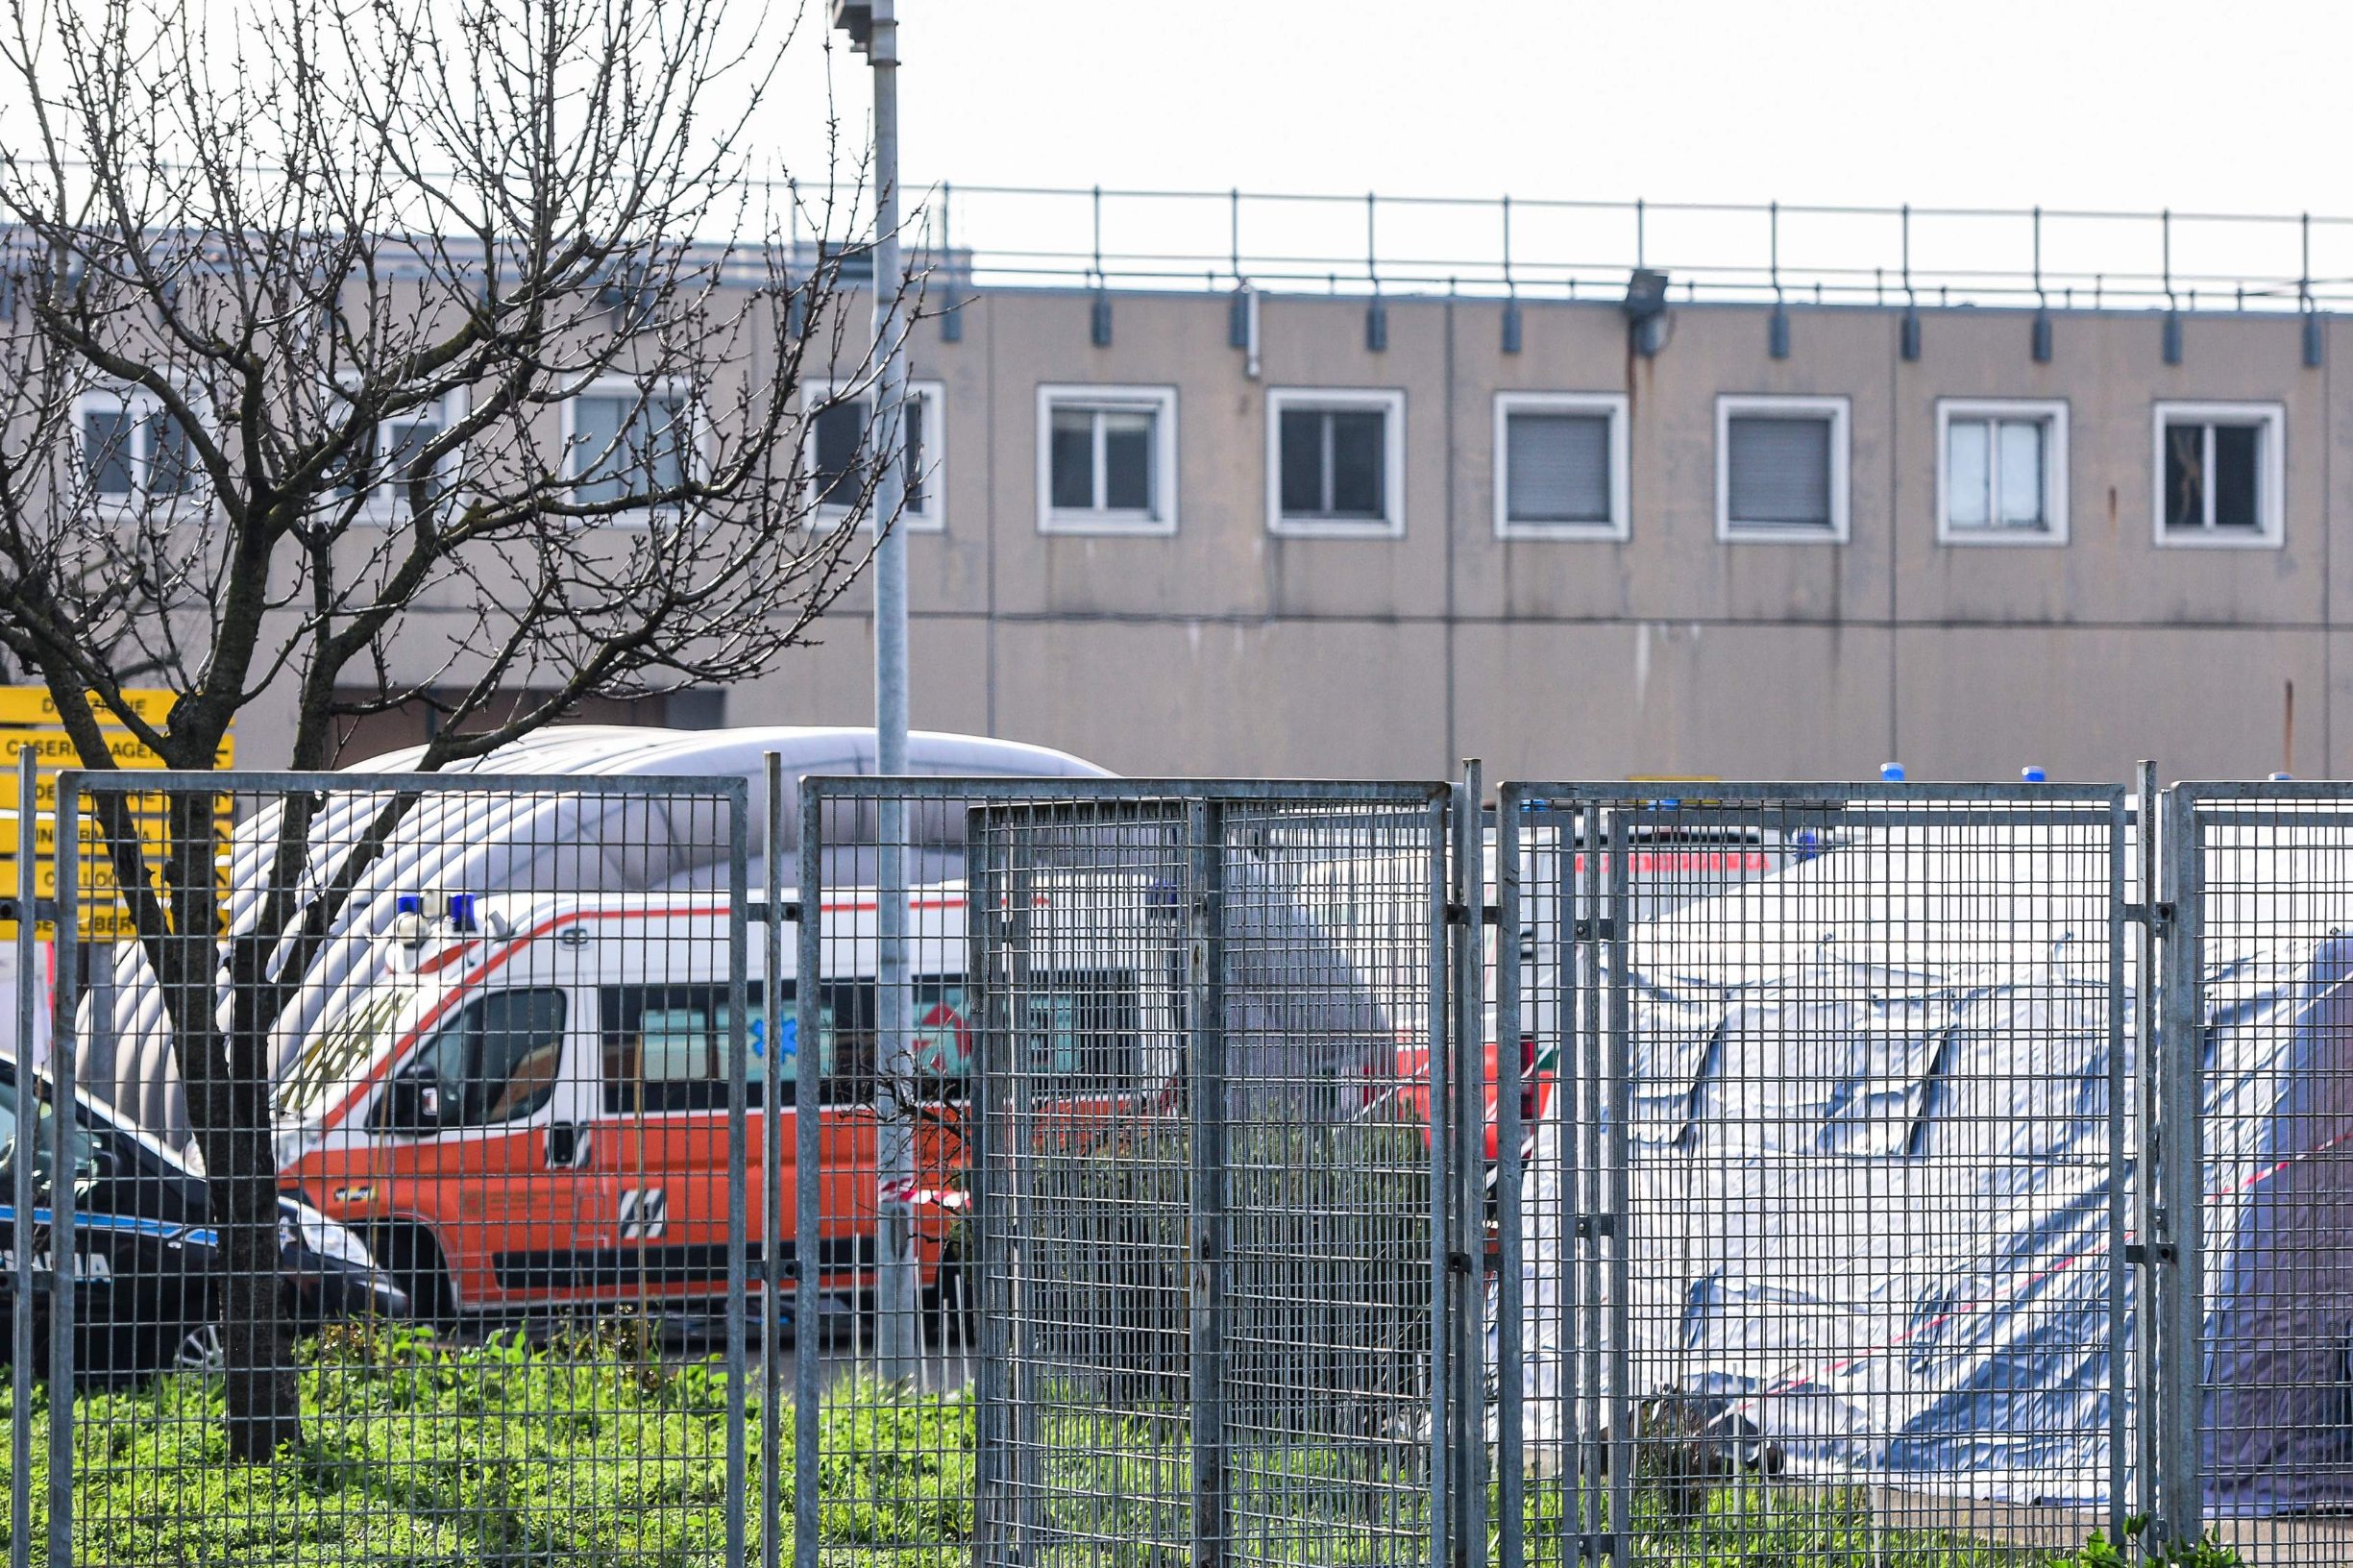 A general view shows an ambulance and a tent inside the SantAnna prison in Modena, Emilia-Romagna, in one of Italy's quarantine red zones on March 9, 2020. - Inmates in four Italian prisons have revolted over new rules introduced to contain the coronavirus outbreak, leaving one prisoner dead and others injured, a prison rights group said on March 8. Prisoners at jails in Naples Poggioreale in the south, Modena in the north, Frosinone in central Italy and at Alexandria in the northwest had all revolted over measures including a ban on family visits, unions said. (Photo by Piero CRUCIATTI / AFP)